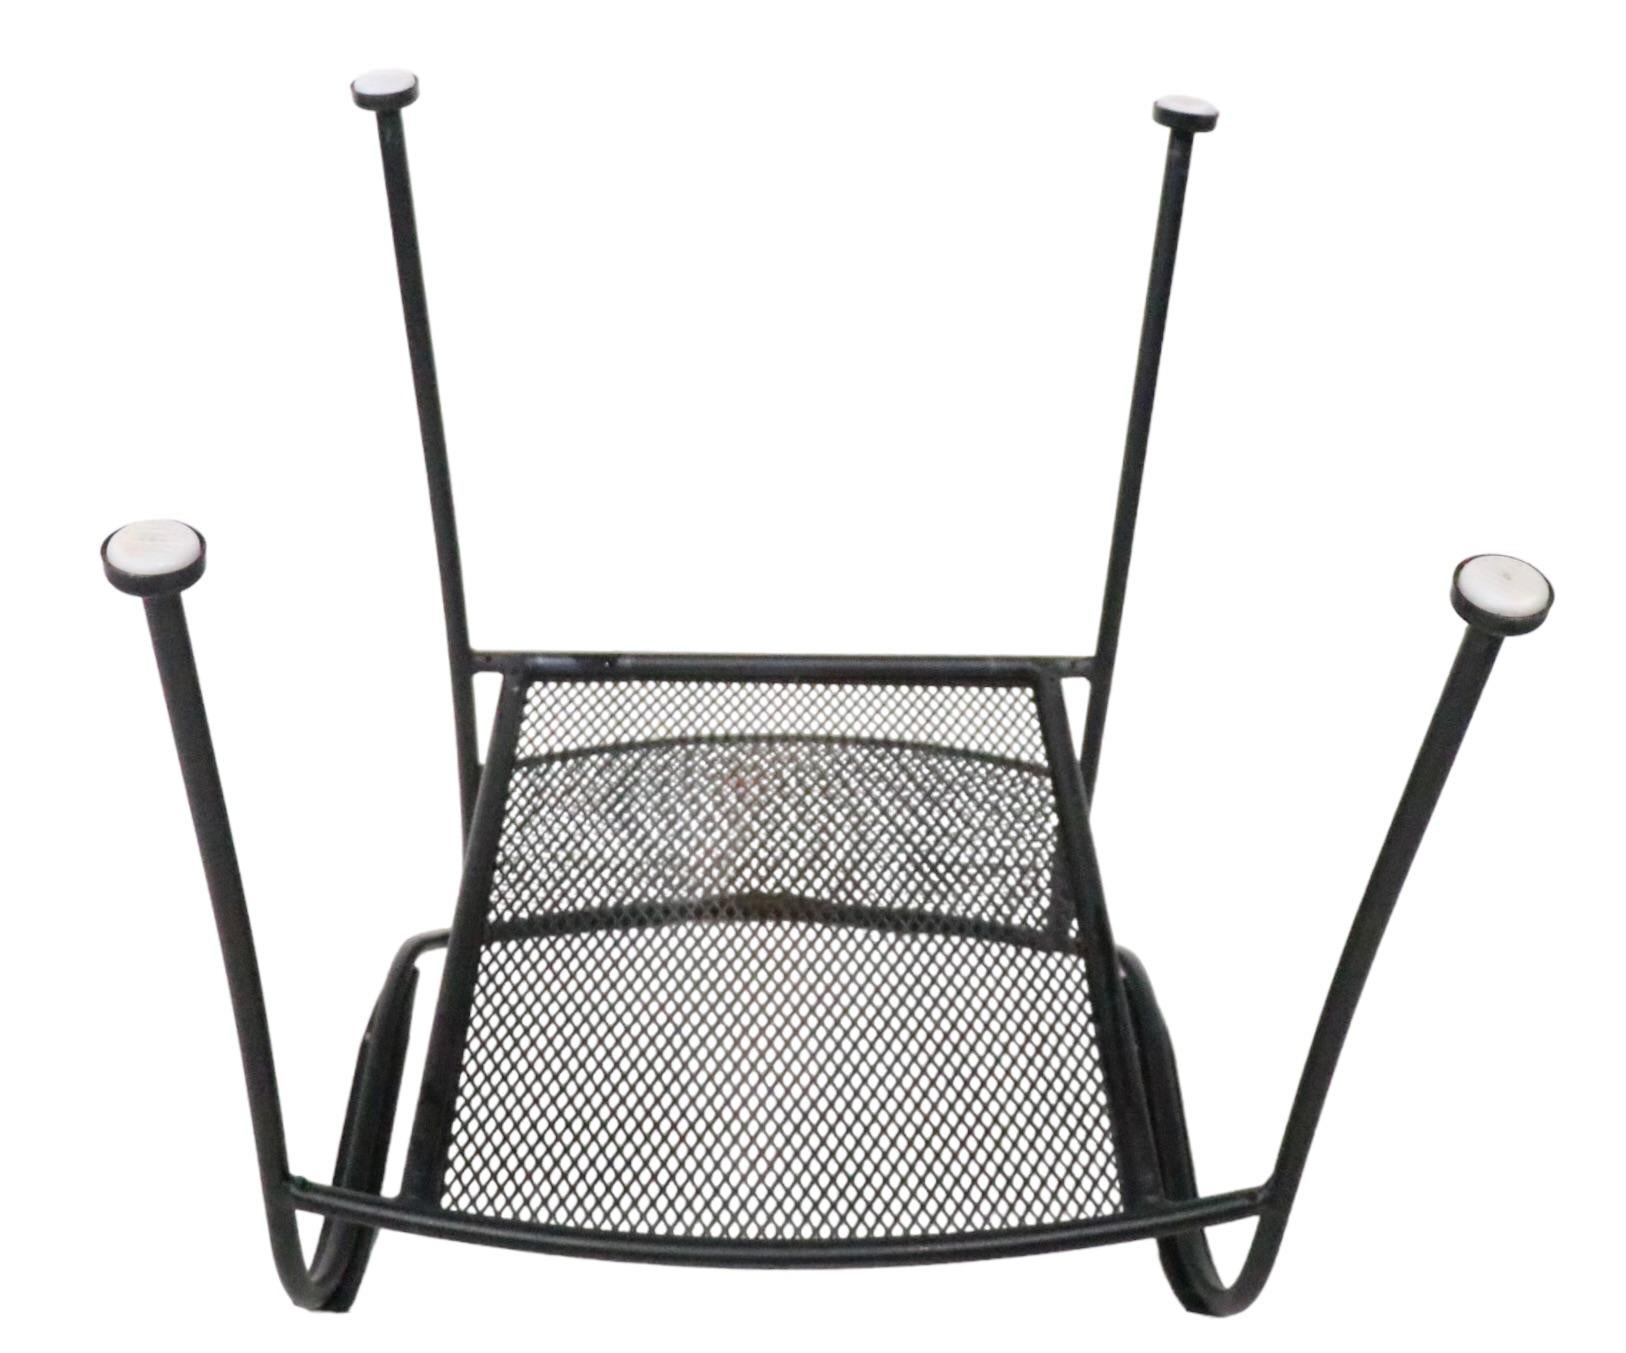 Nice clean set of Post Modern outdoor metal dining chairs, in the style of Woodard. The chairs feature tubular metal frames, with flat bar armrests, and metal mesh seats and backrests. All four are in excellent , clean, original, ready to use